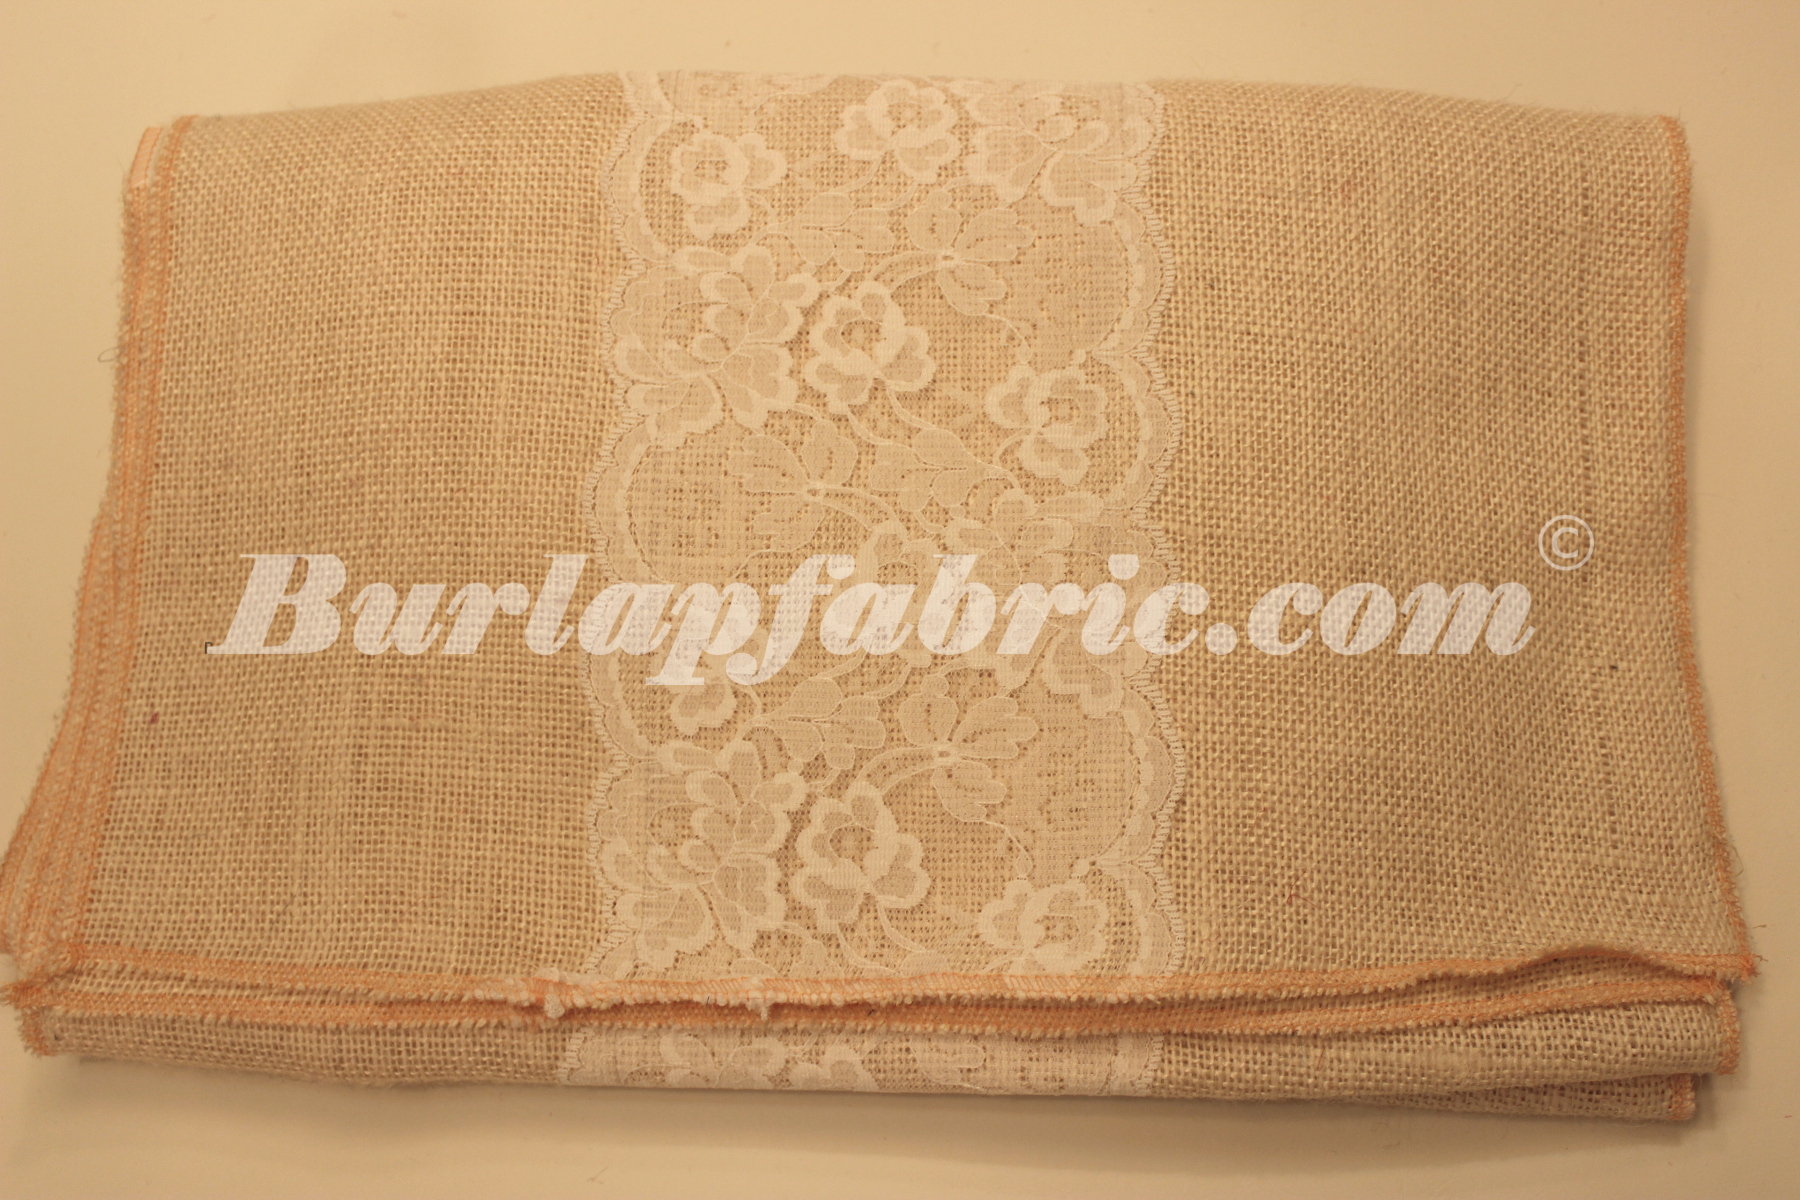 118" Ivory Voile Fabric By The Yard